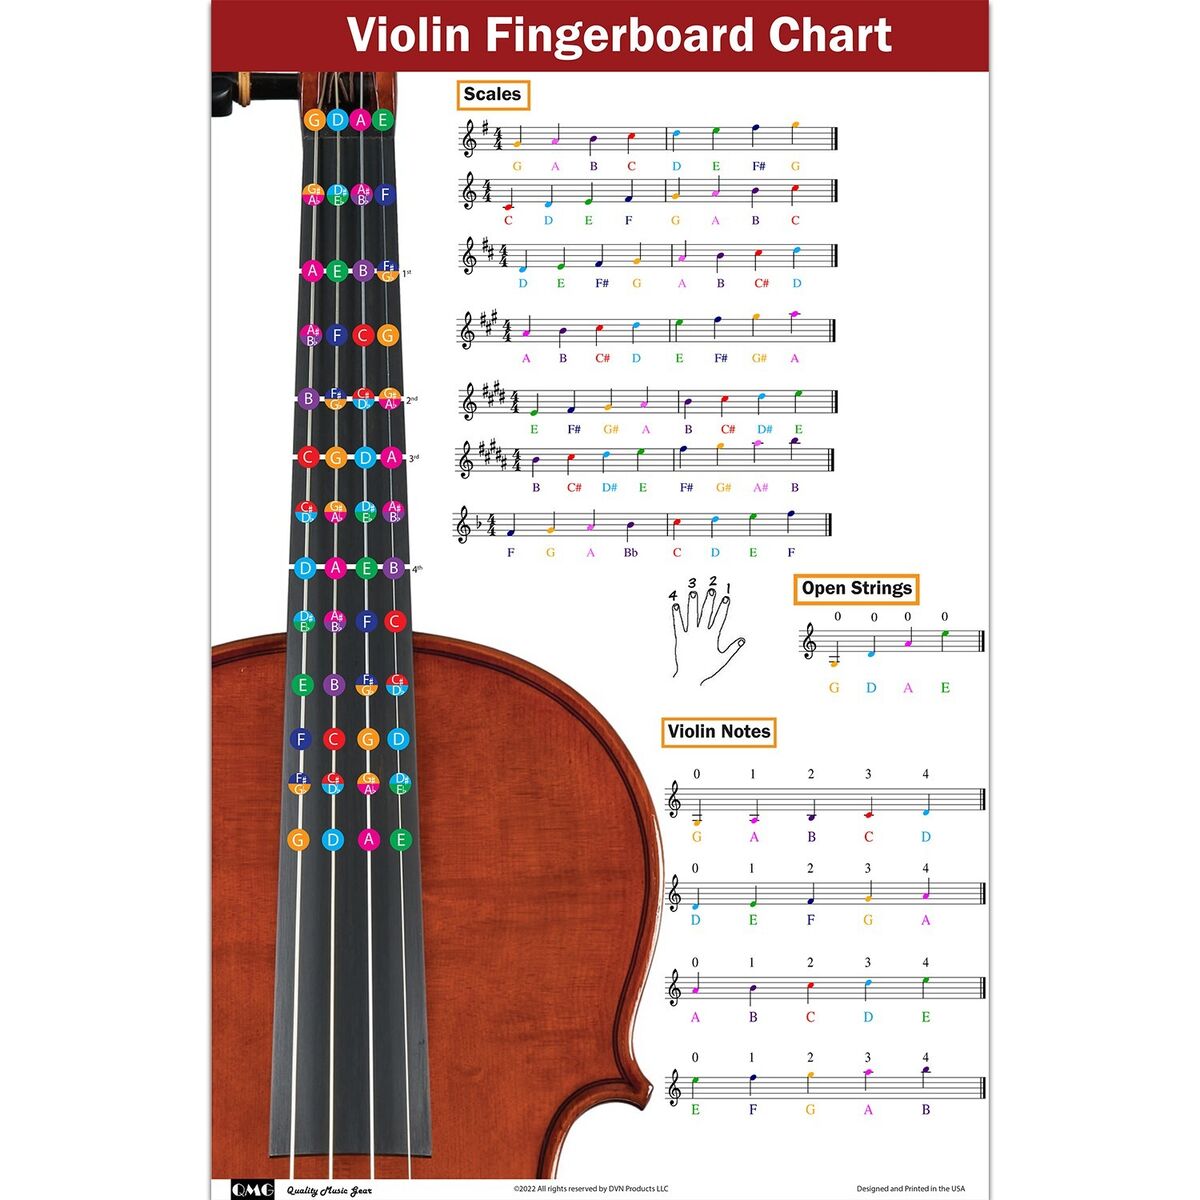 Violin fingering chart with color